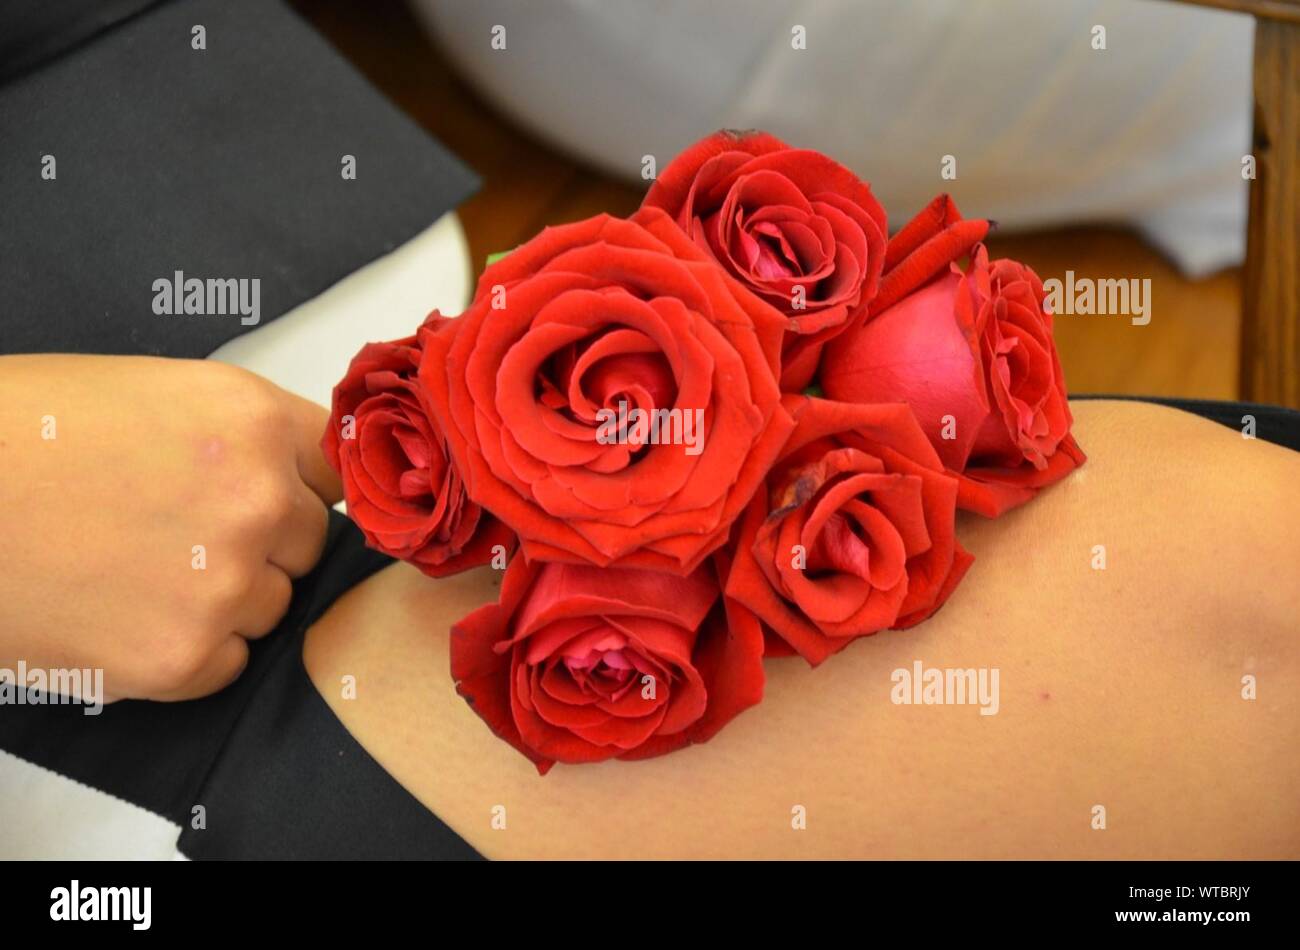 Red Roses On Person Lap At Home Stock Photo